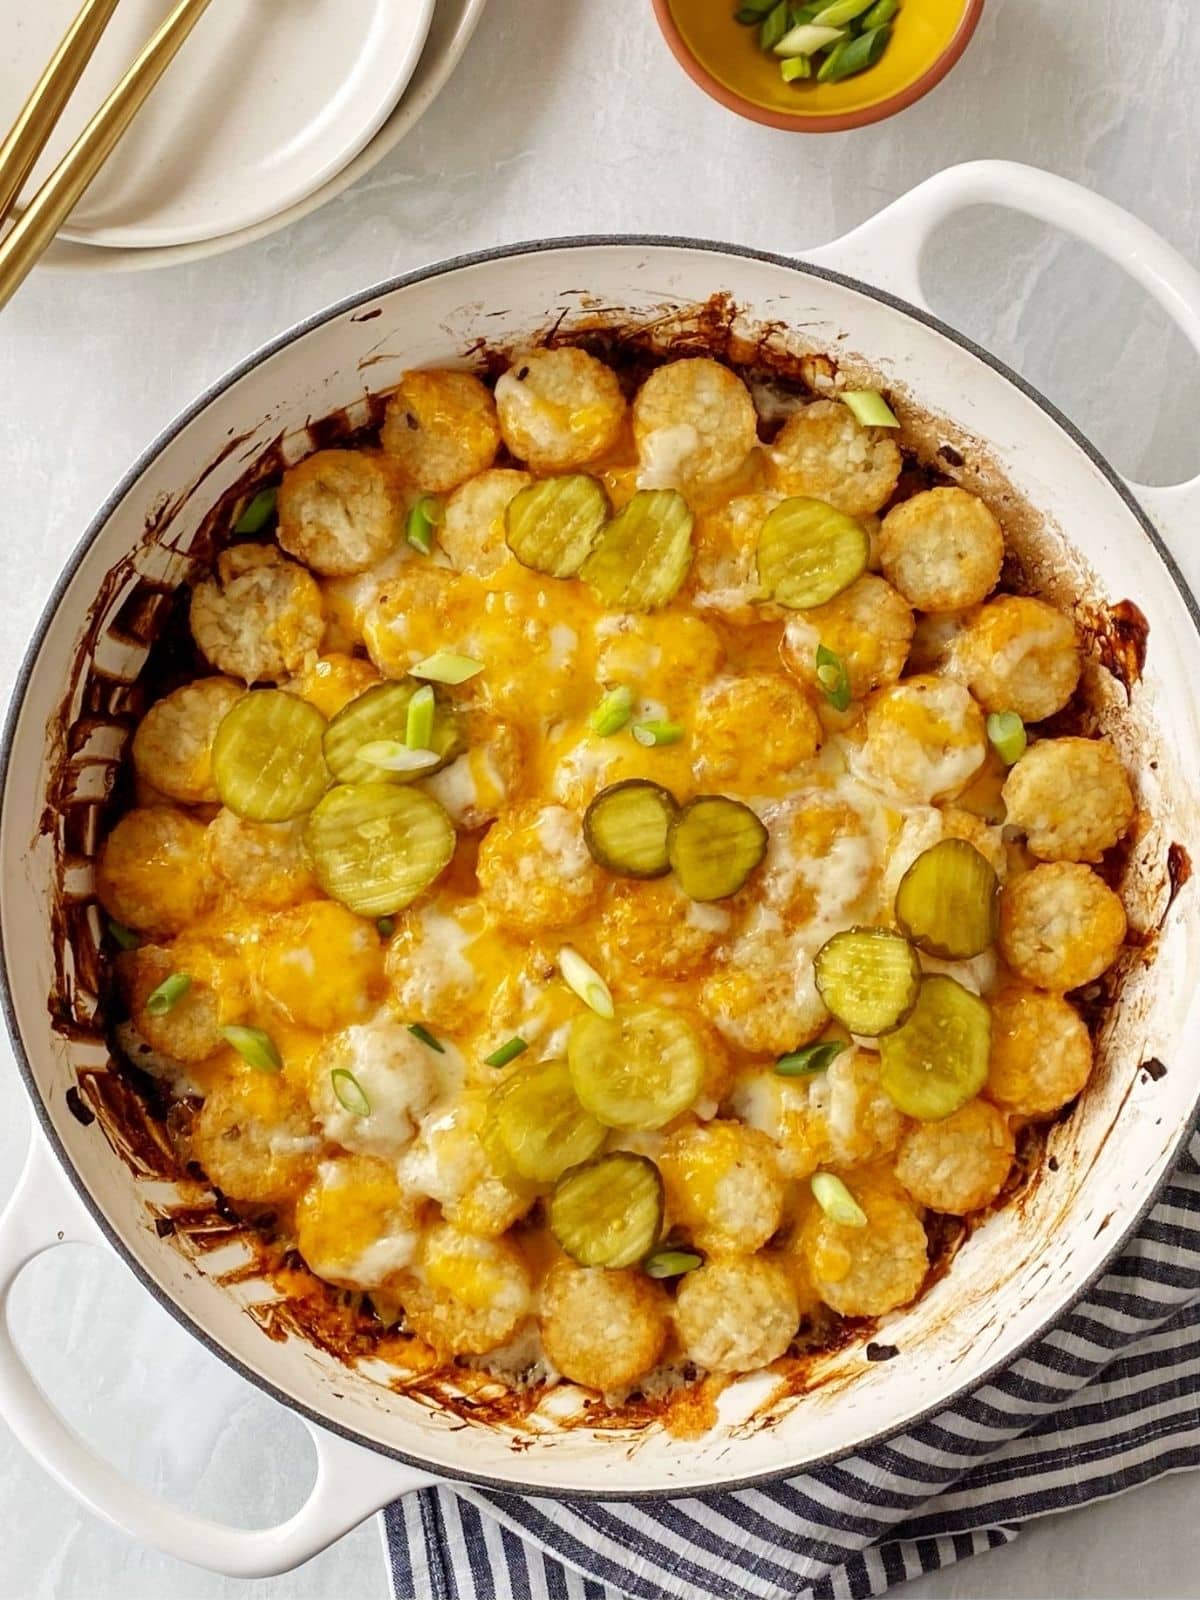 skillet casserole garnished with pickles and scallions.